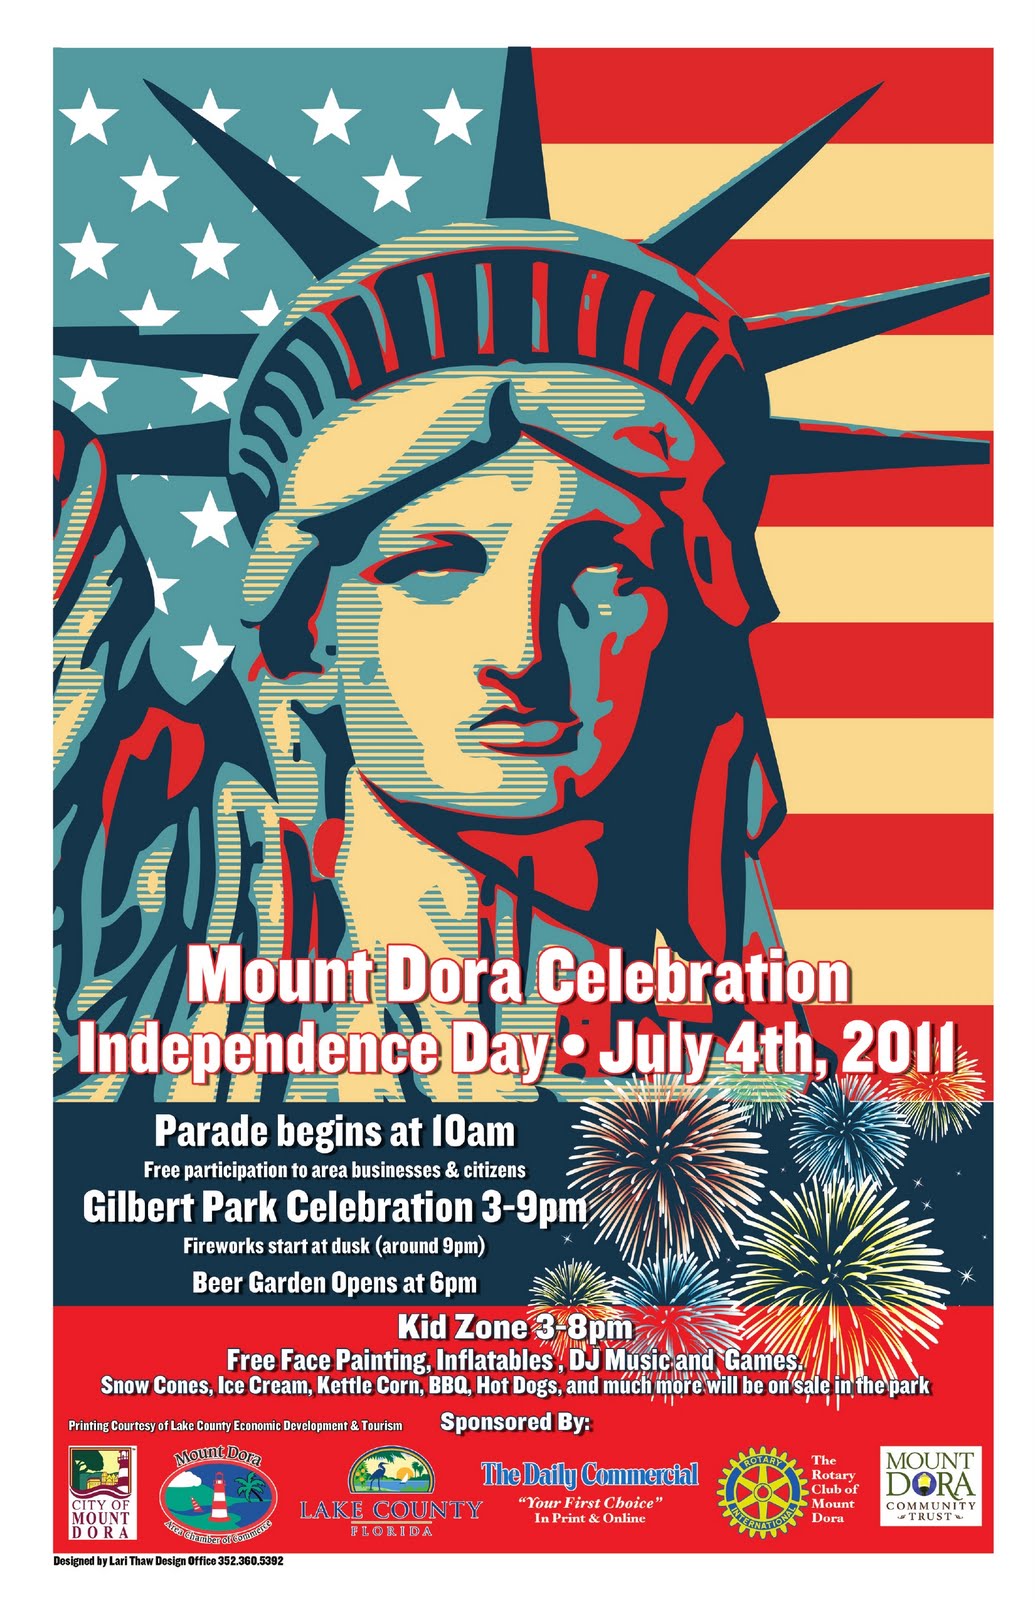 What To Do In Mount Dora 4th of July in Mount Dora